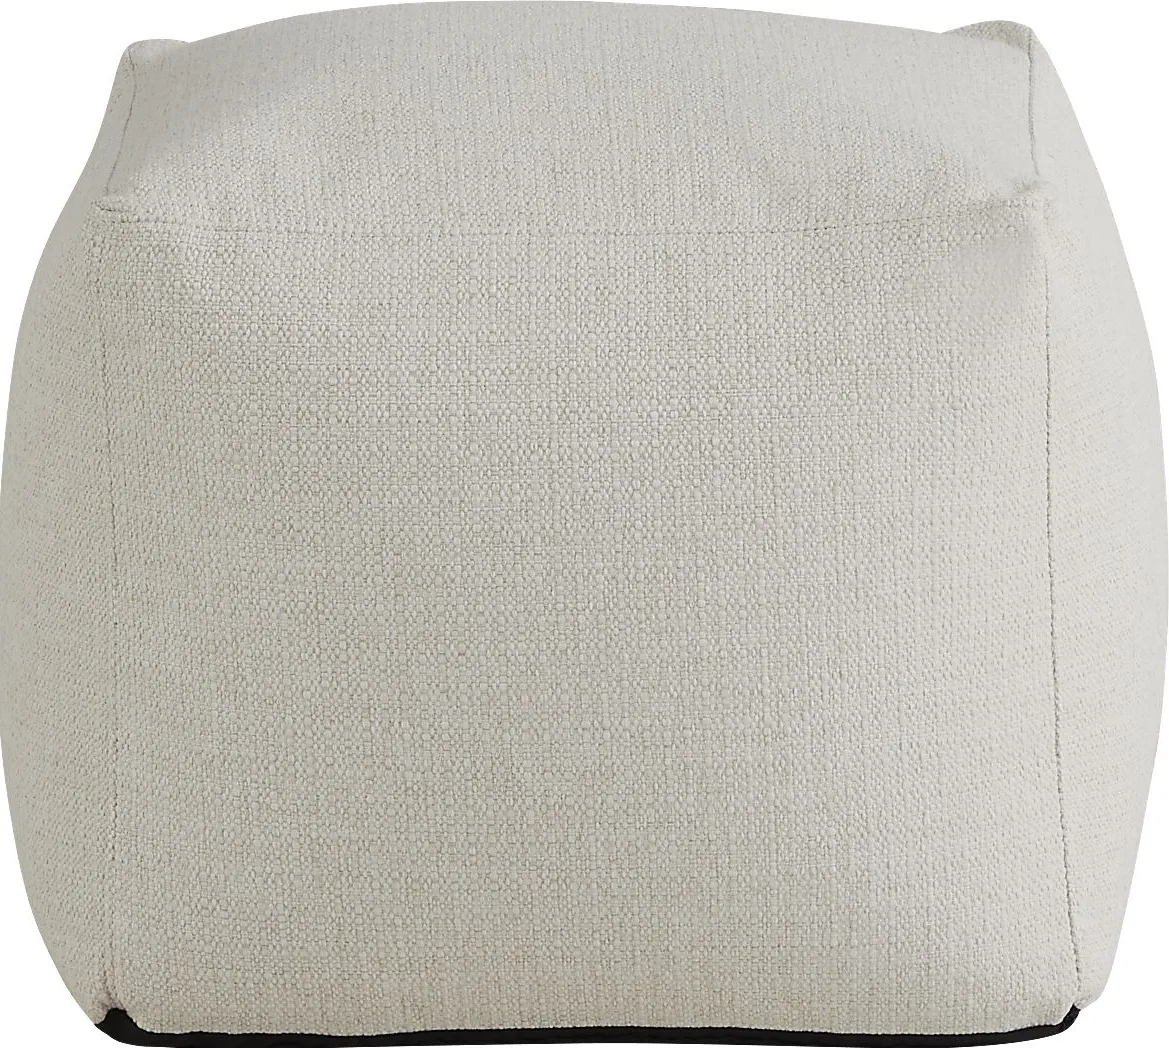 Hanover Off-White Textured Accent Pouf